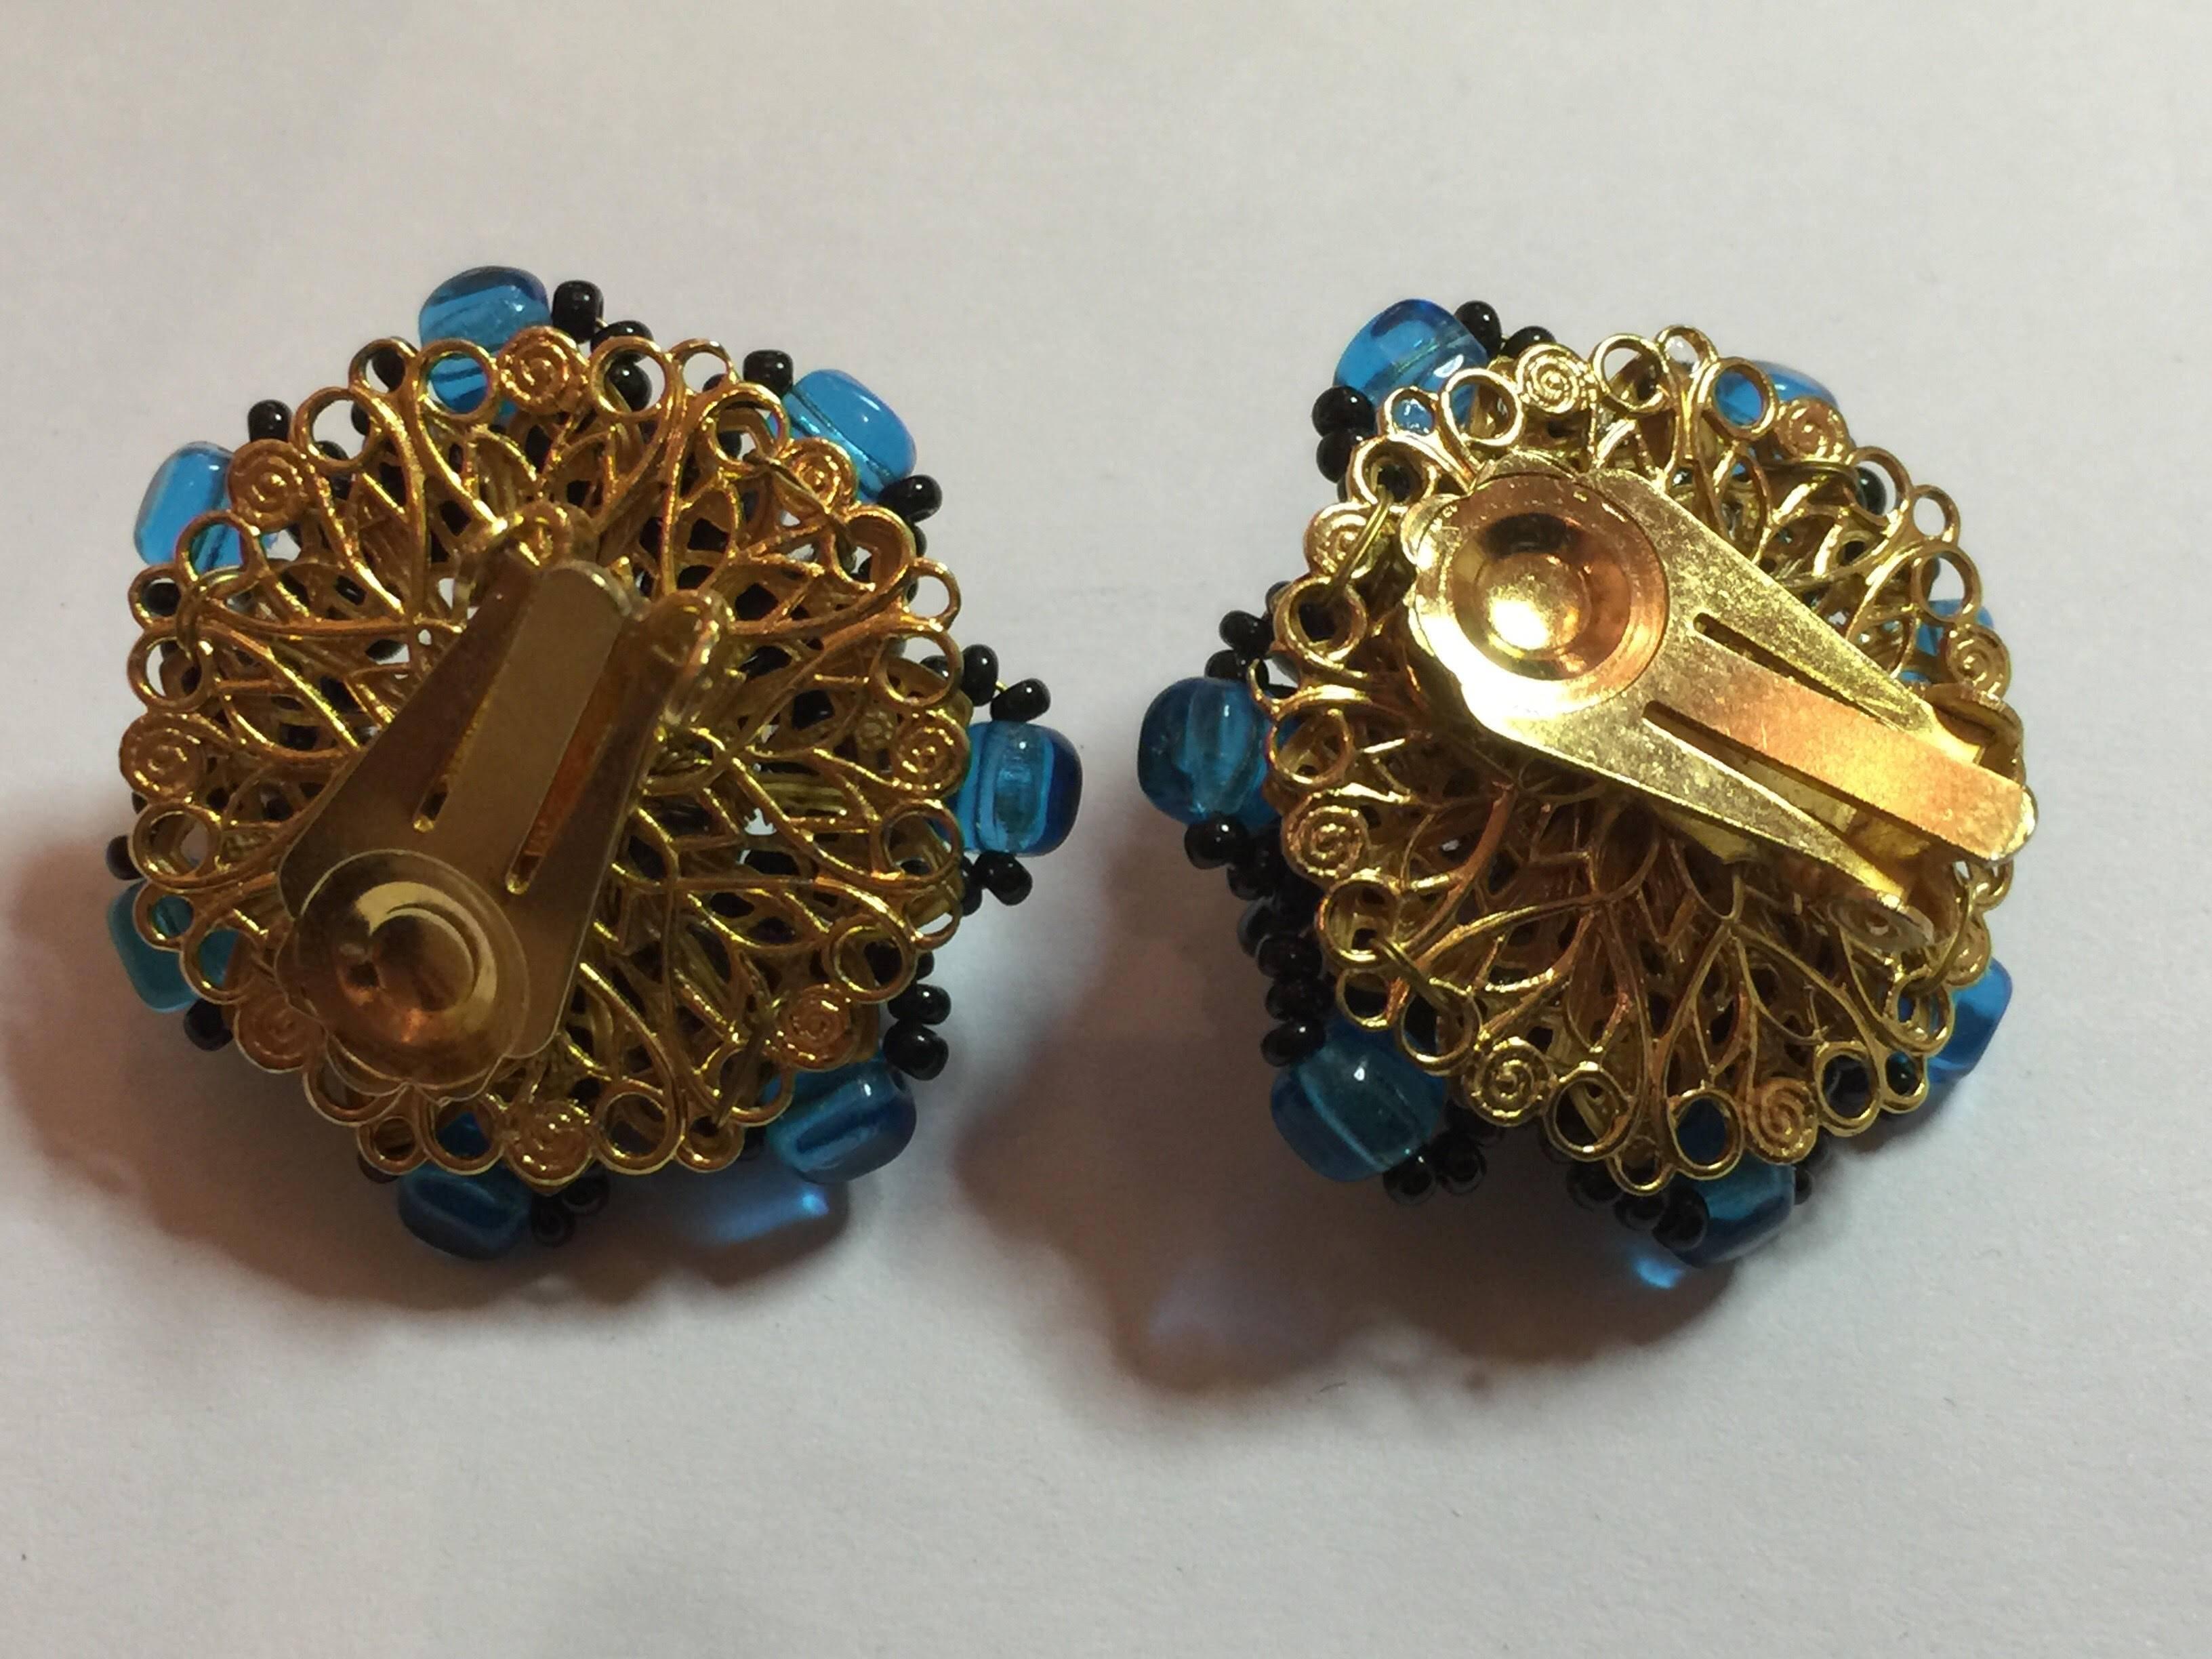 1970s DeLillo Faux Aquamarine Jet Bead and Rhinestone Clip Back Earrings exhibit all the style that the artist and his partner Robert Clark, in their work alongside storied designer Miriam Haskell produced. Influenced by the intricate wiring of seed